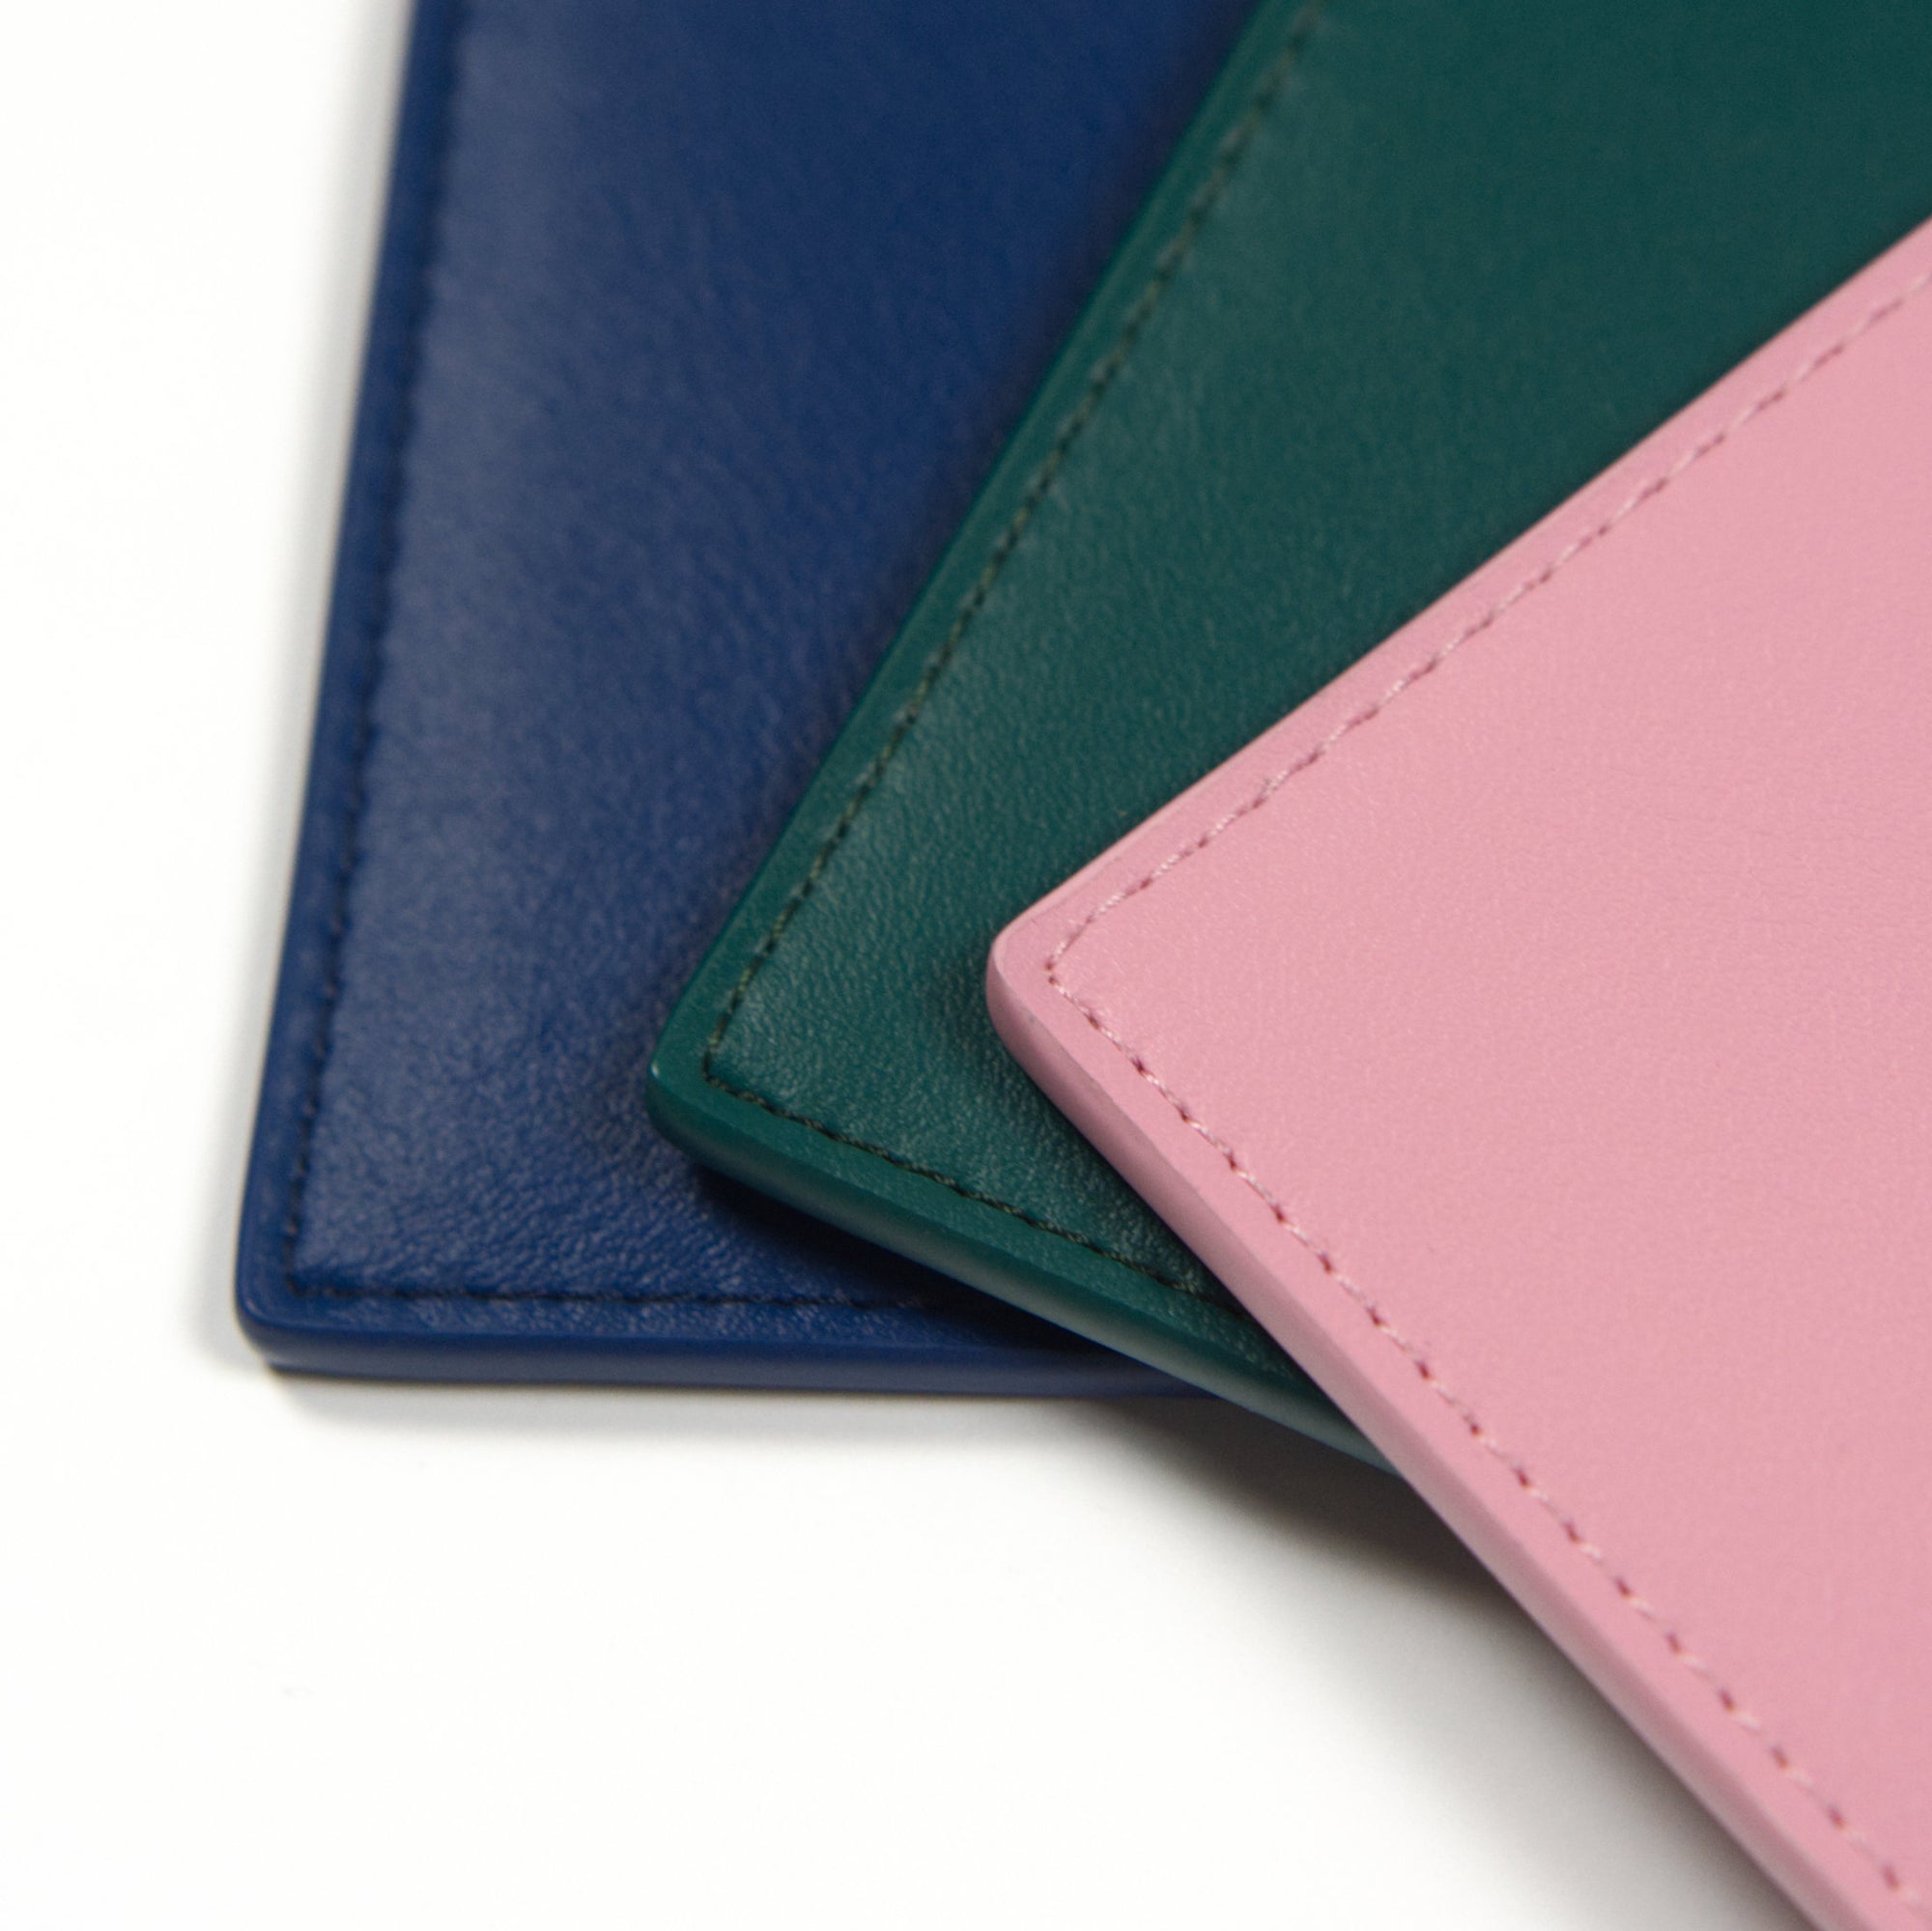 colored pocket protectors for lab coats and white coats